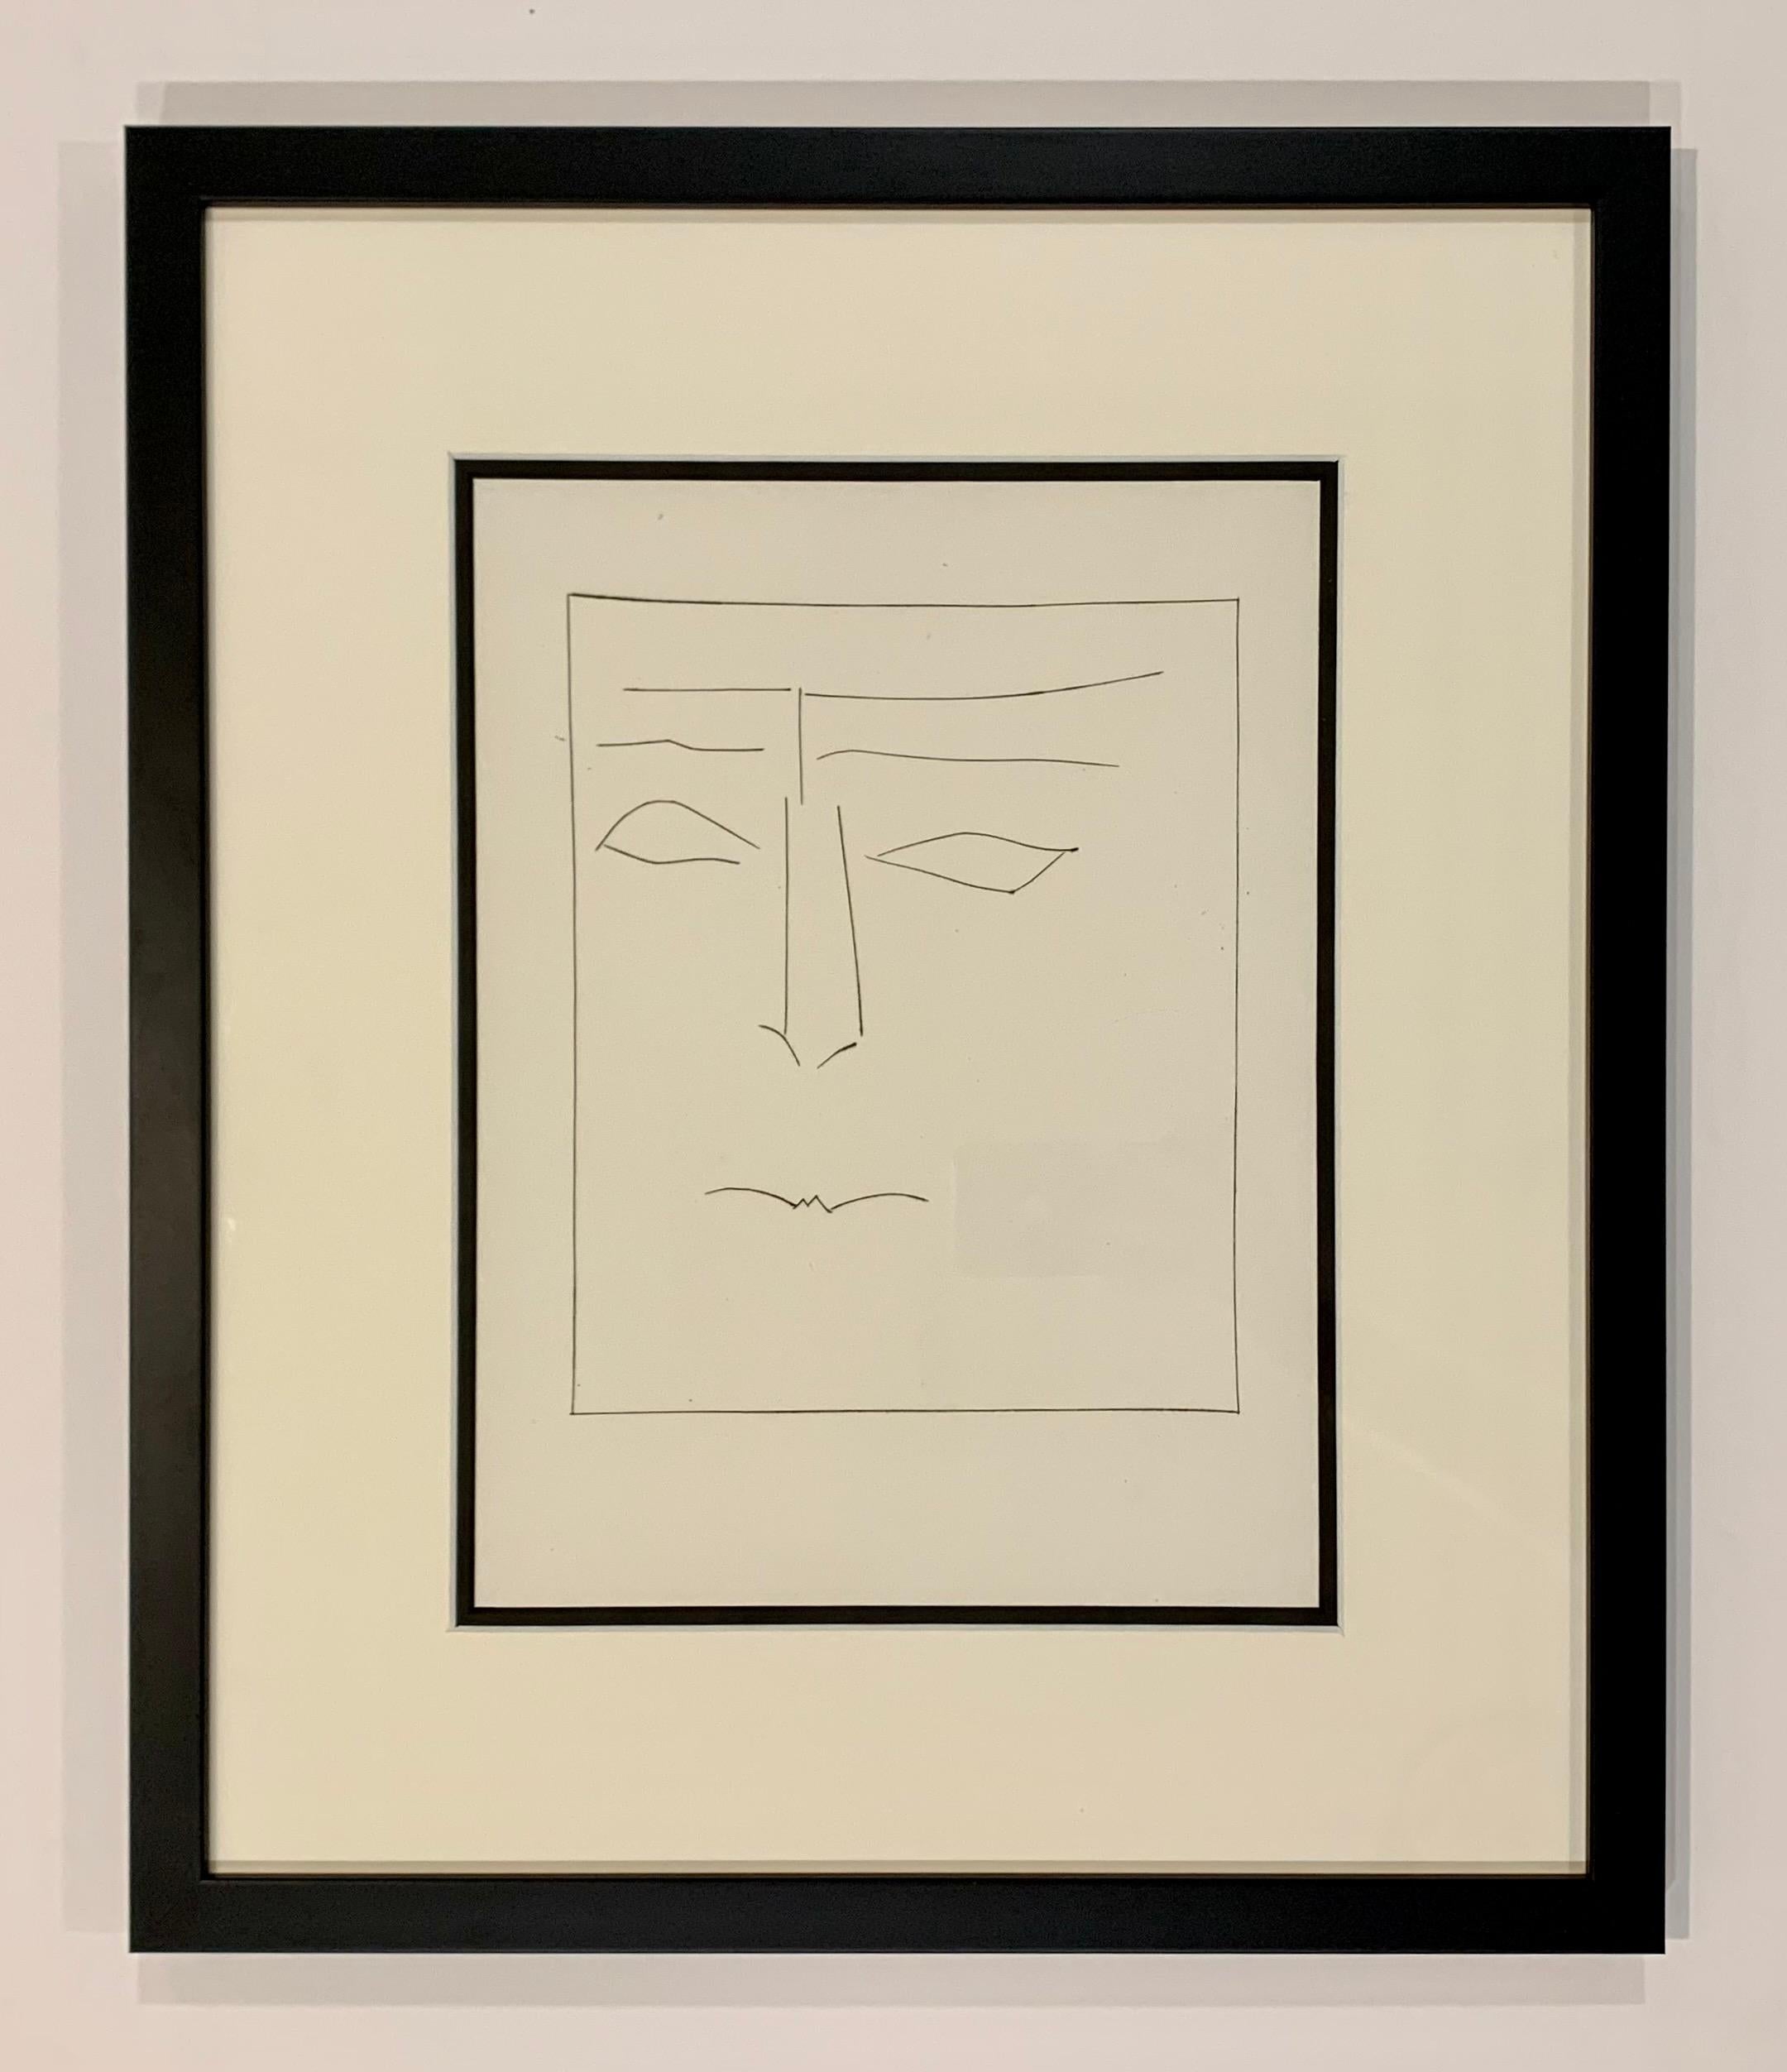 Pablo Picasso Portrait Print - Carmen, Square Head of a Man with Clenched Mouth (Plate IX)